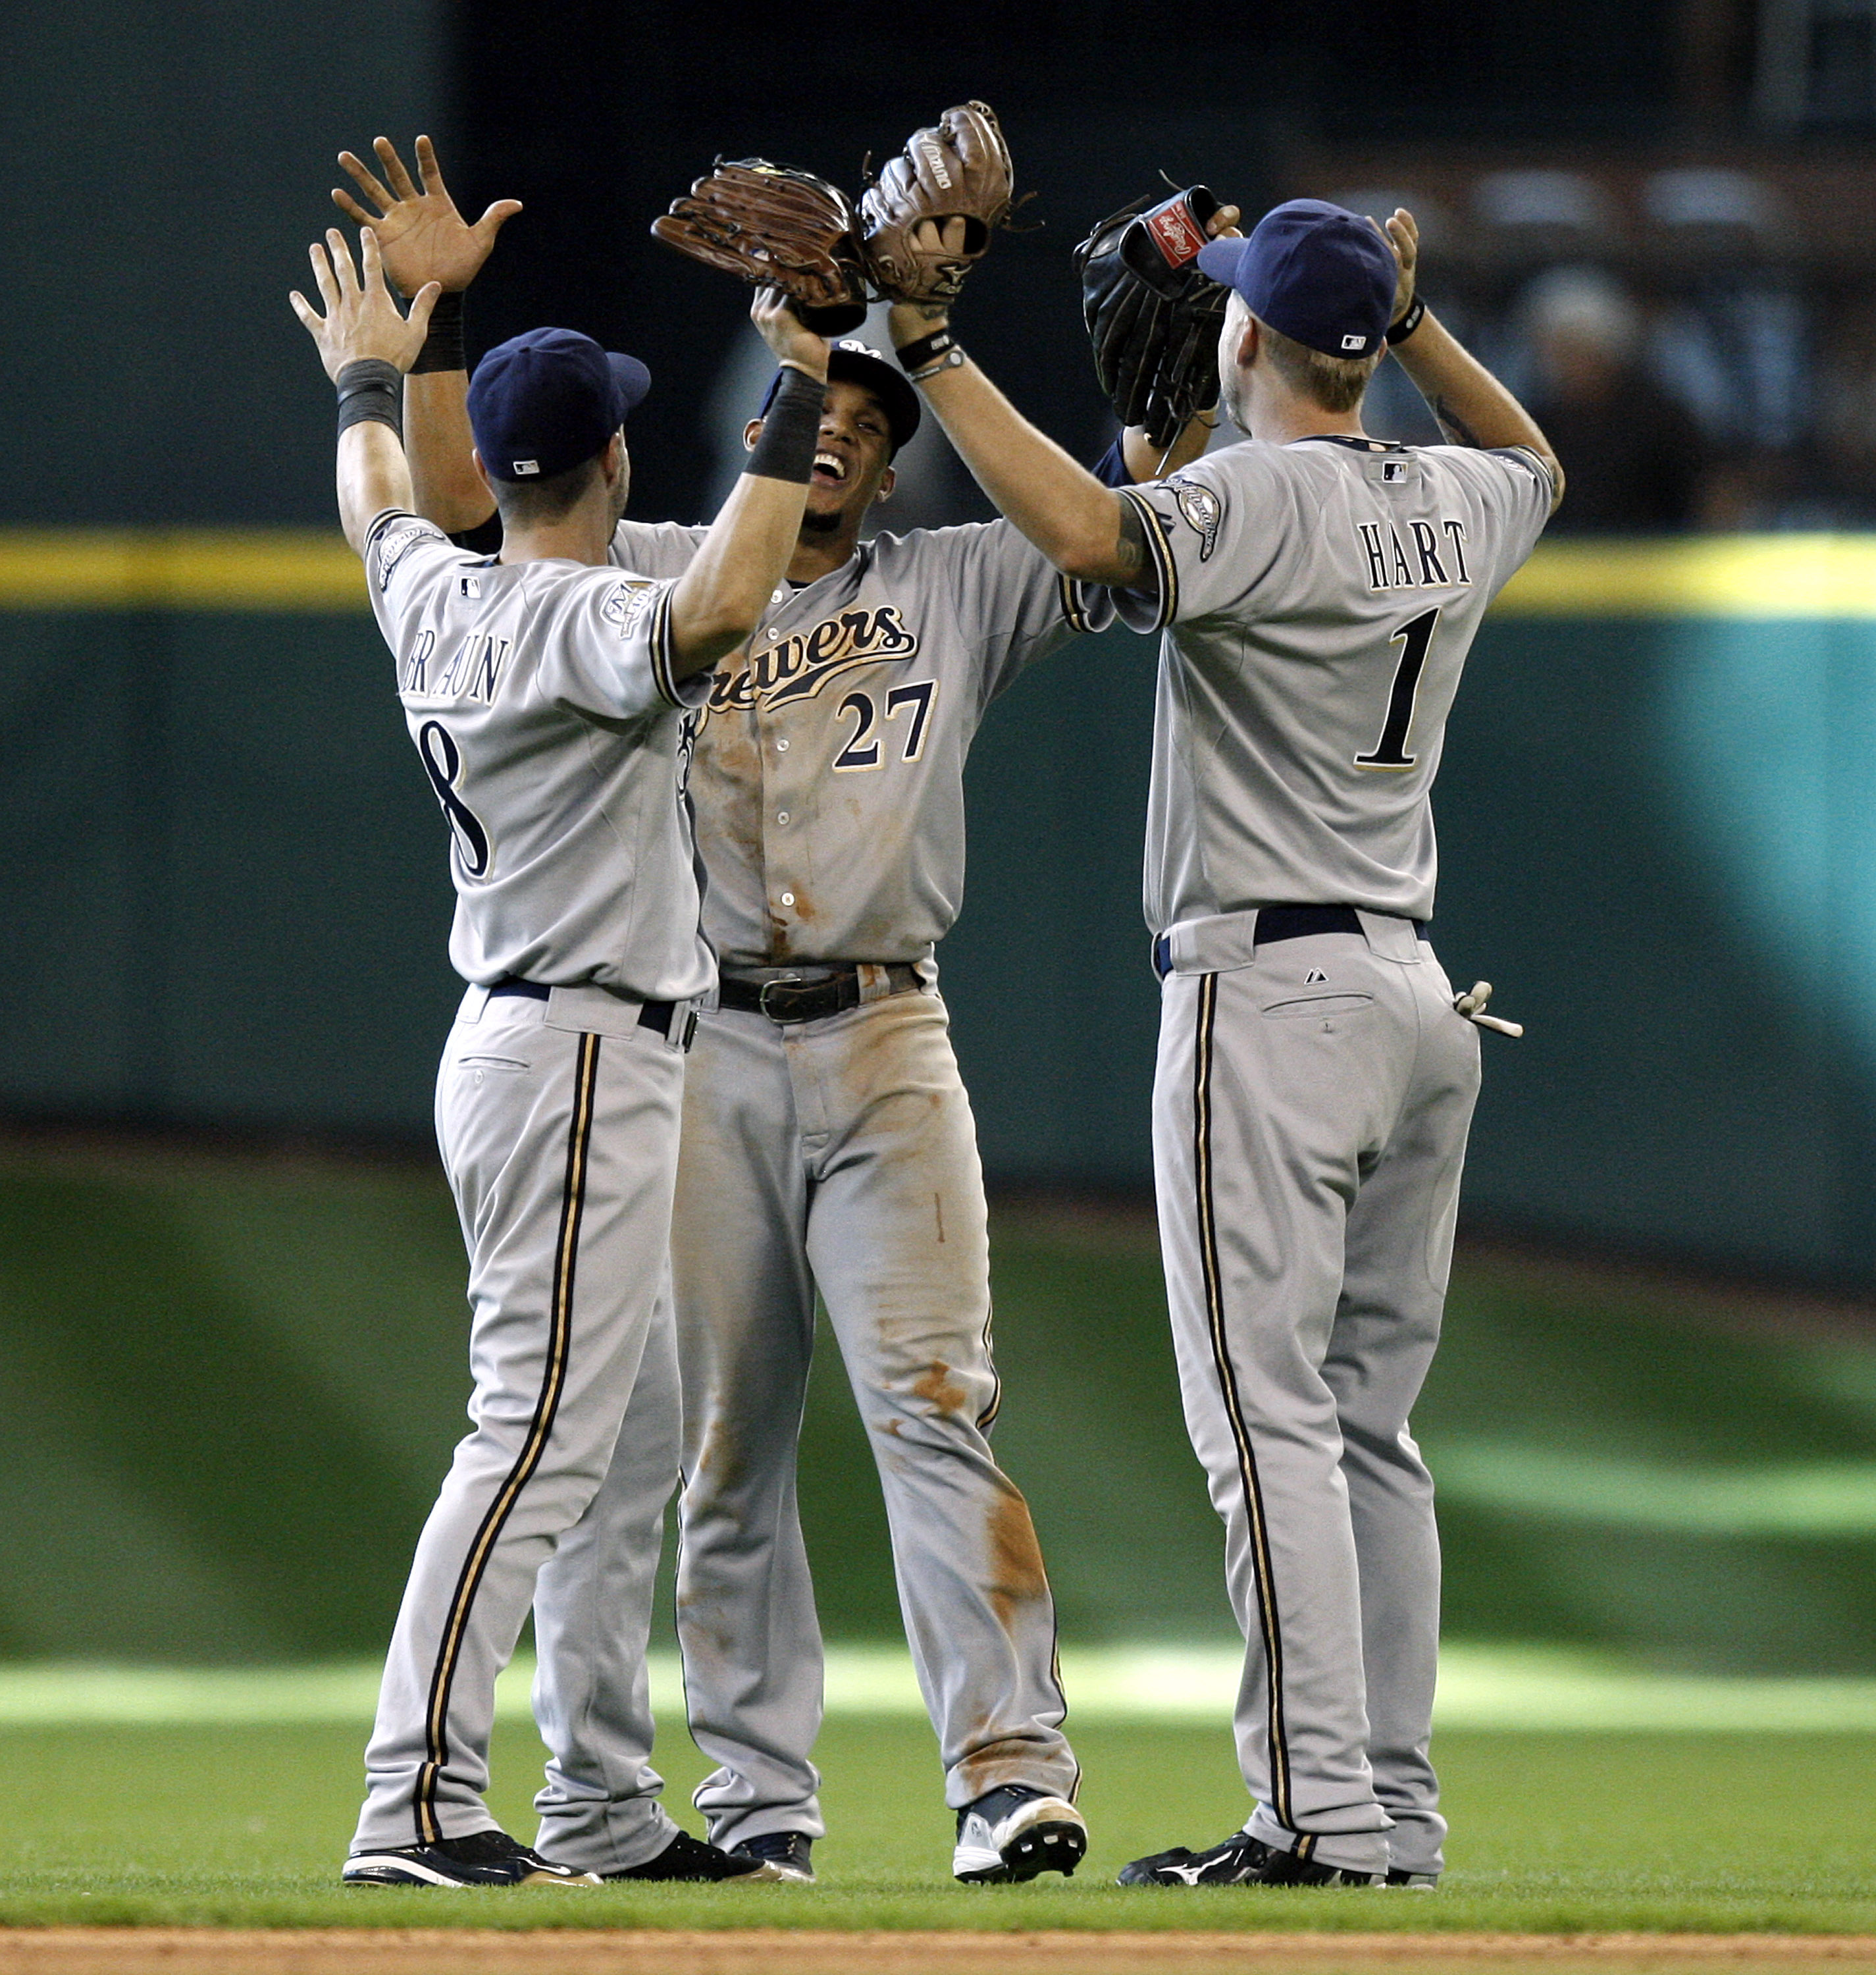 HOUSTON - SEPTEMBER 15:  Carlos Gomez, center, Ryan Braun, left, and Corey Hart of the Milwaukee Brewers celebrate their win over the Houston Astros 8-6 in ten innings at Minute Maid Park on September 15, 2010 in Houston, Texas.  (Photo by Bob Levey/Getty